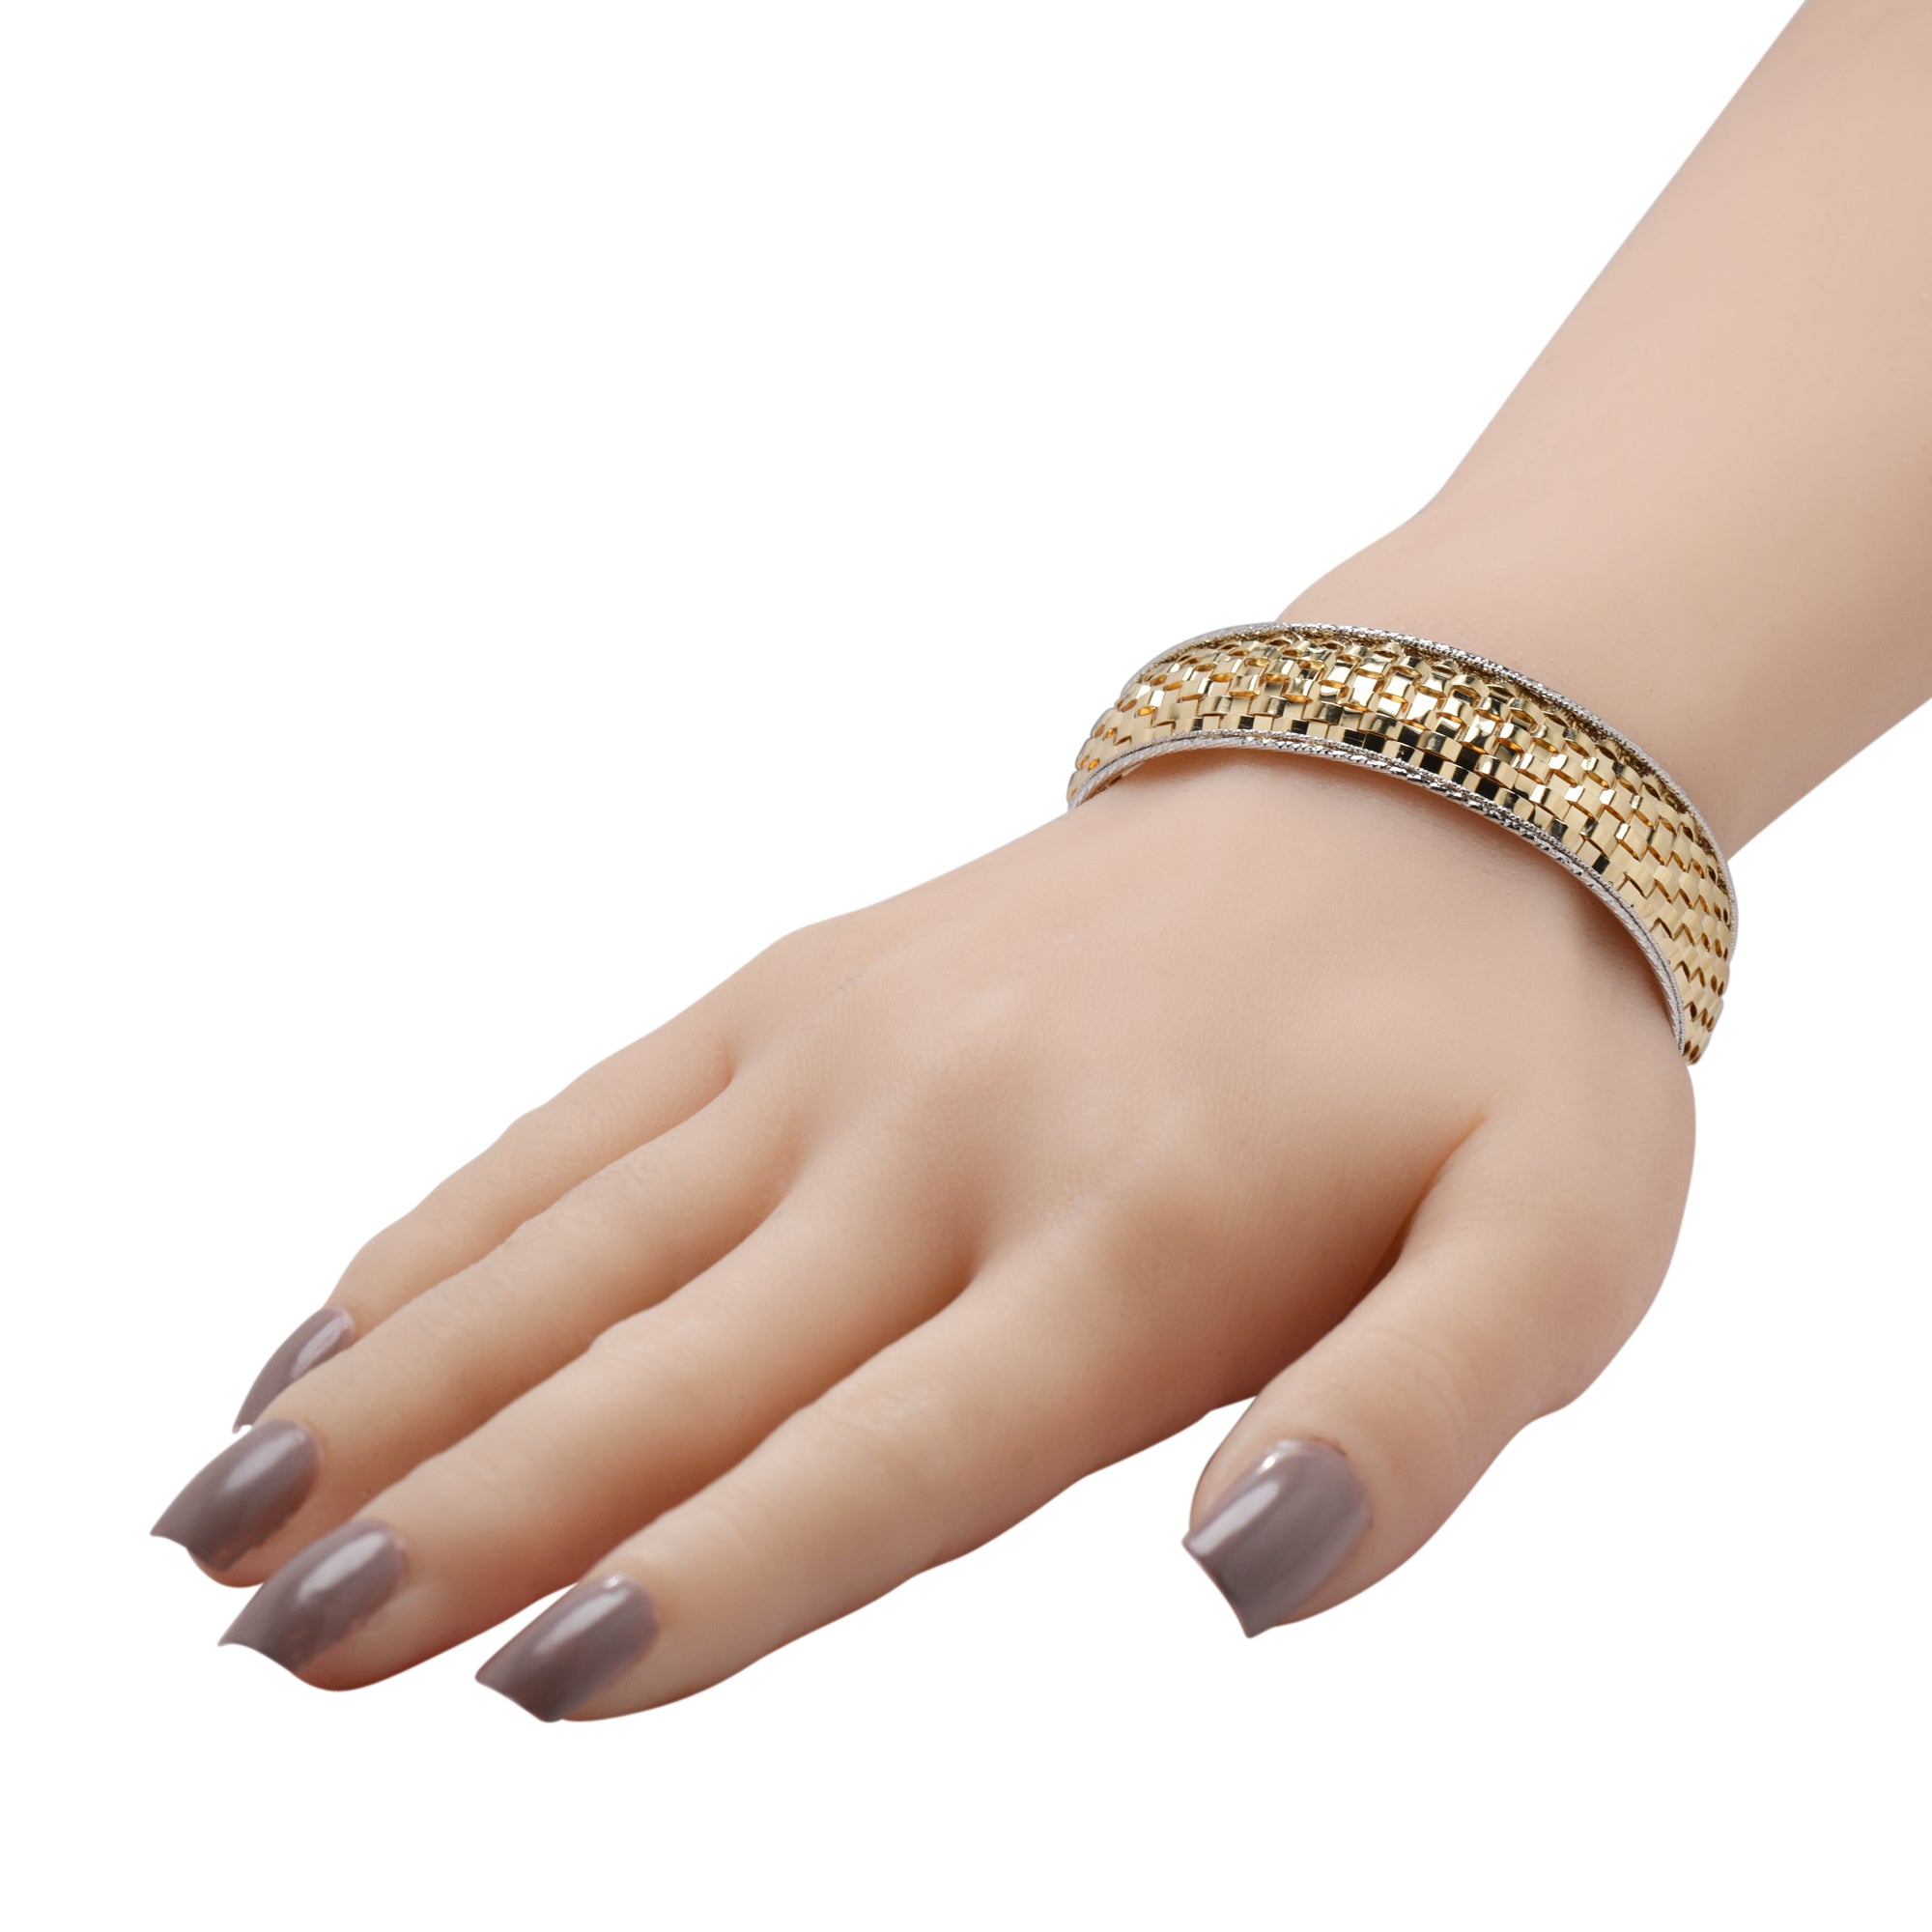 Phillip Gavriel Heritage Basket weave Cuff Bracelet in 14kt Yellow and White Gold